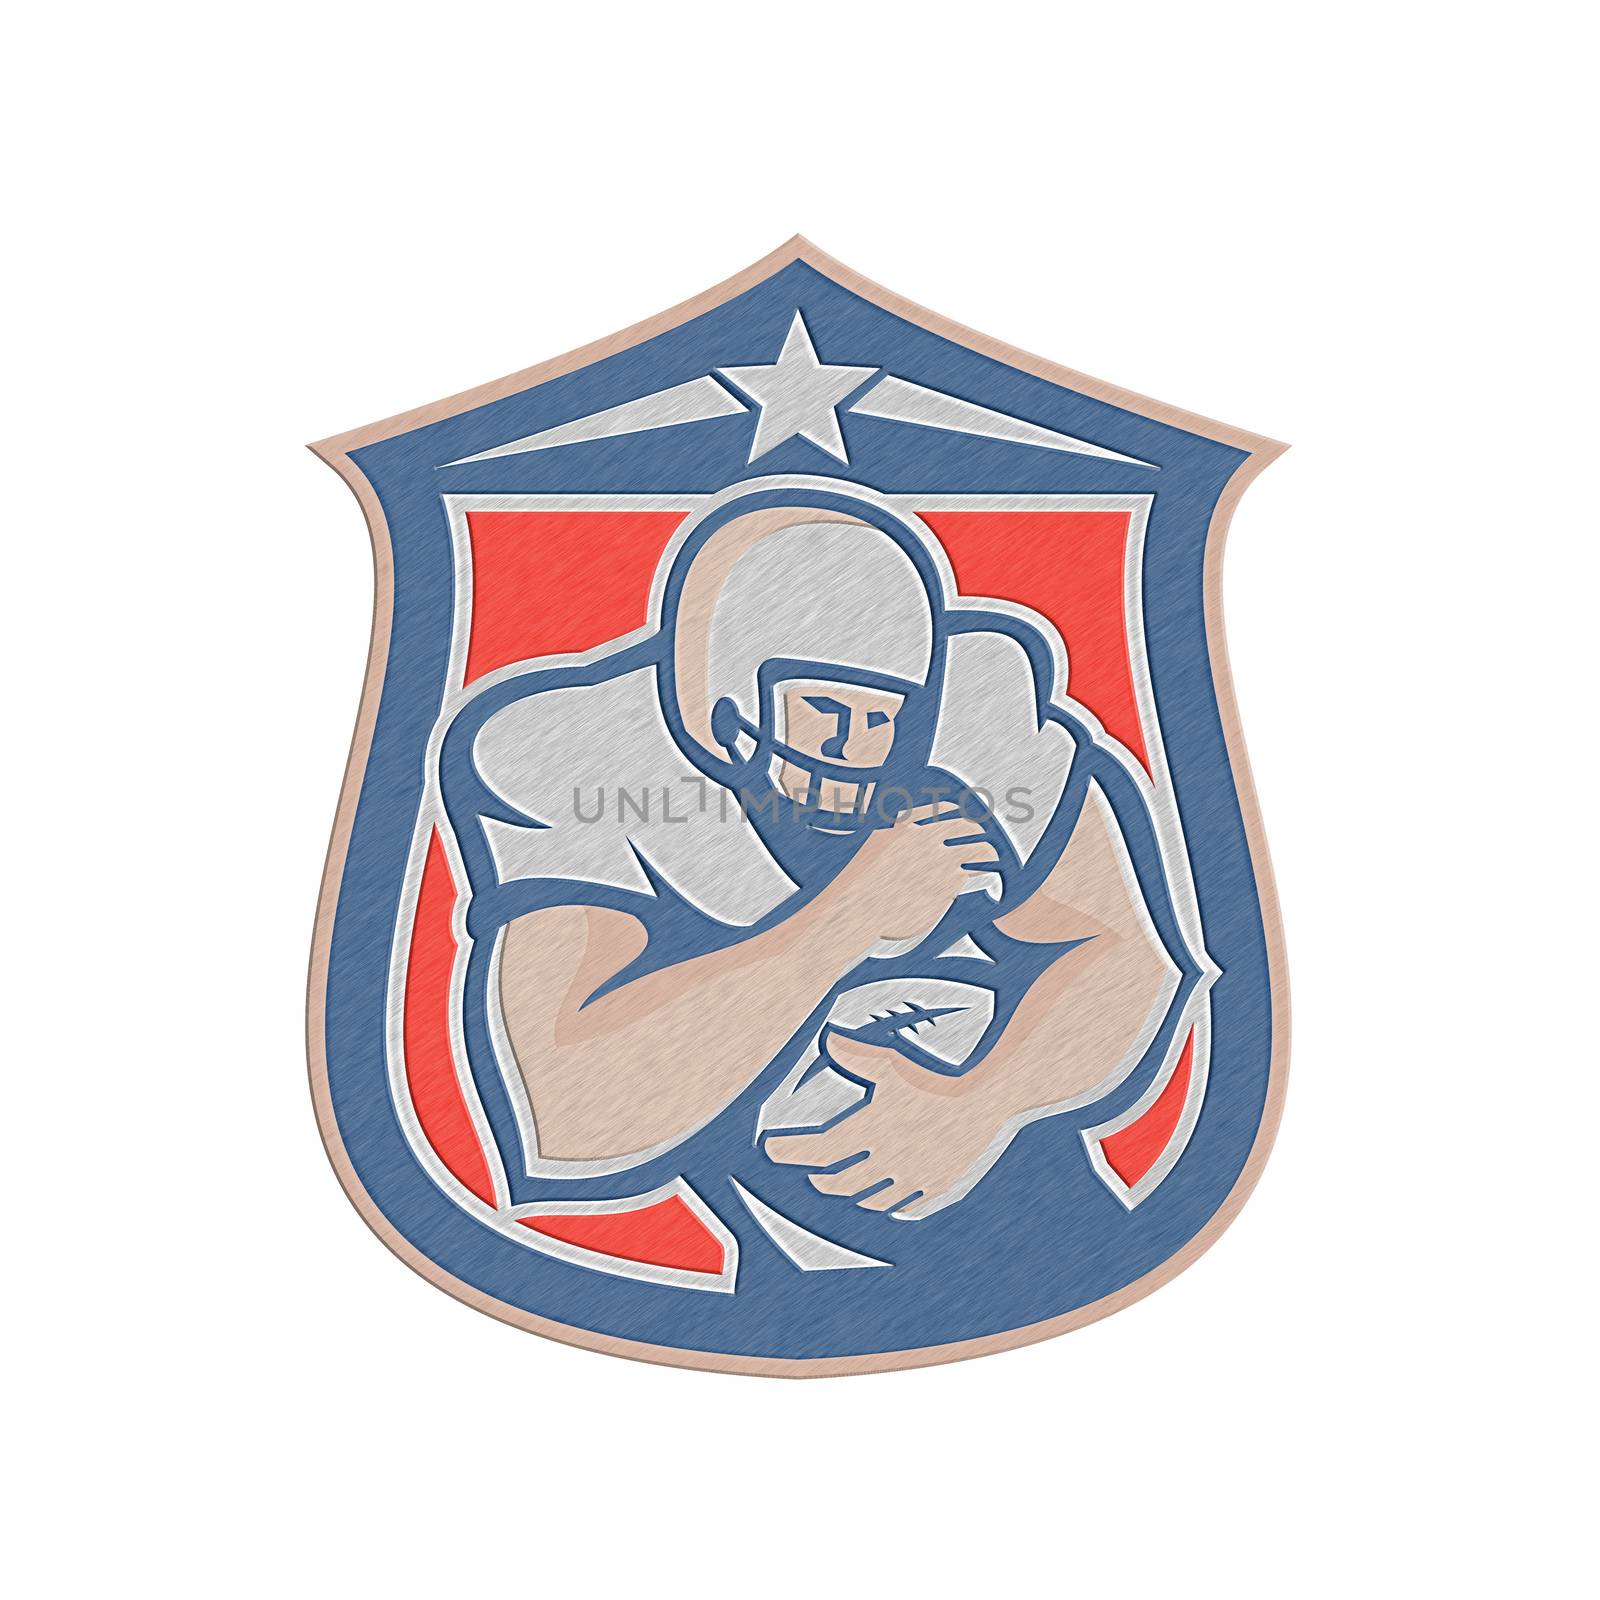 Metallic styled illustration of an american football with helmet on holding ball set inside shield crest viewed from the front done in retro style. 